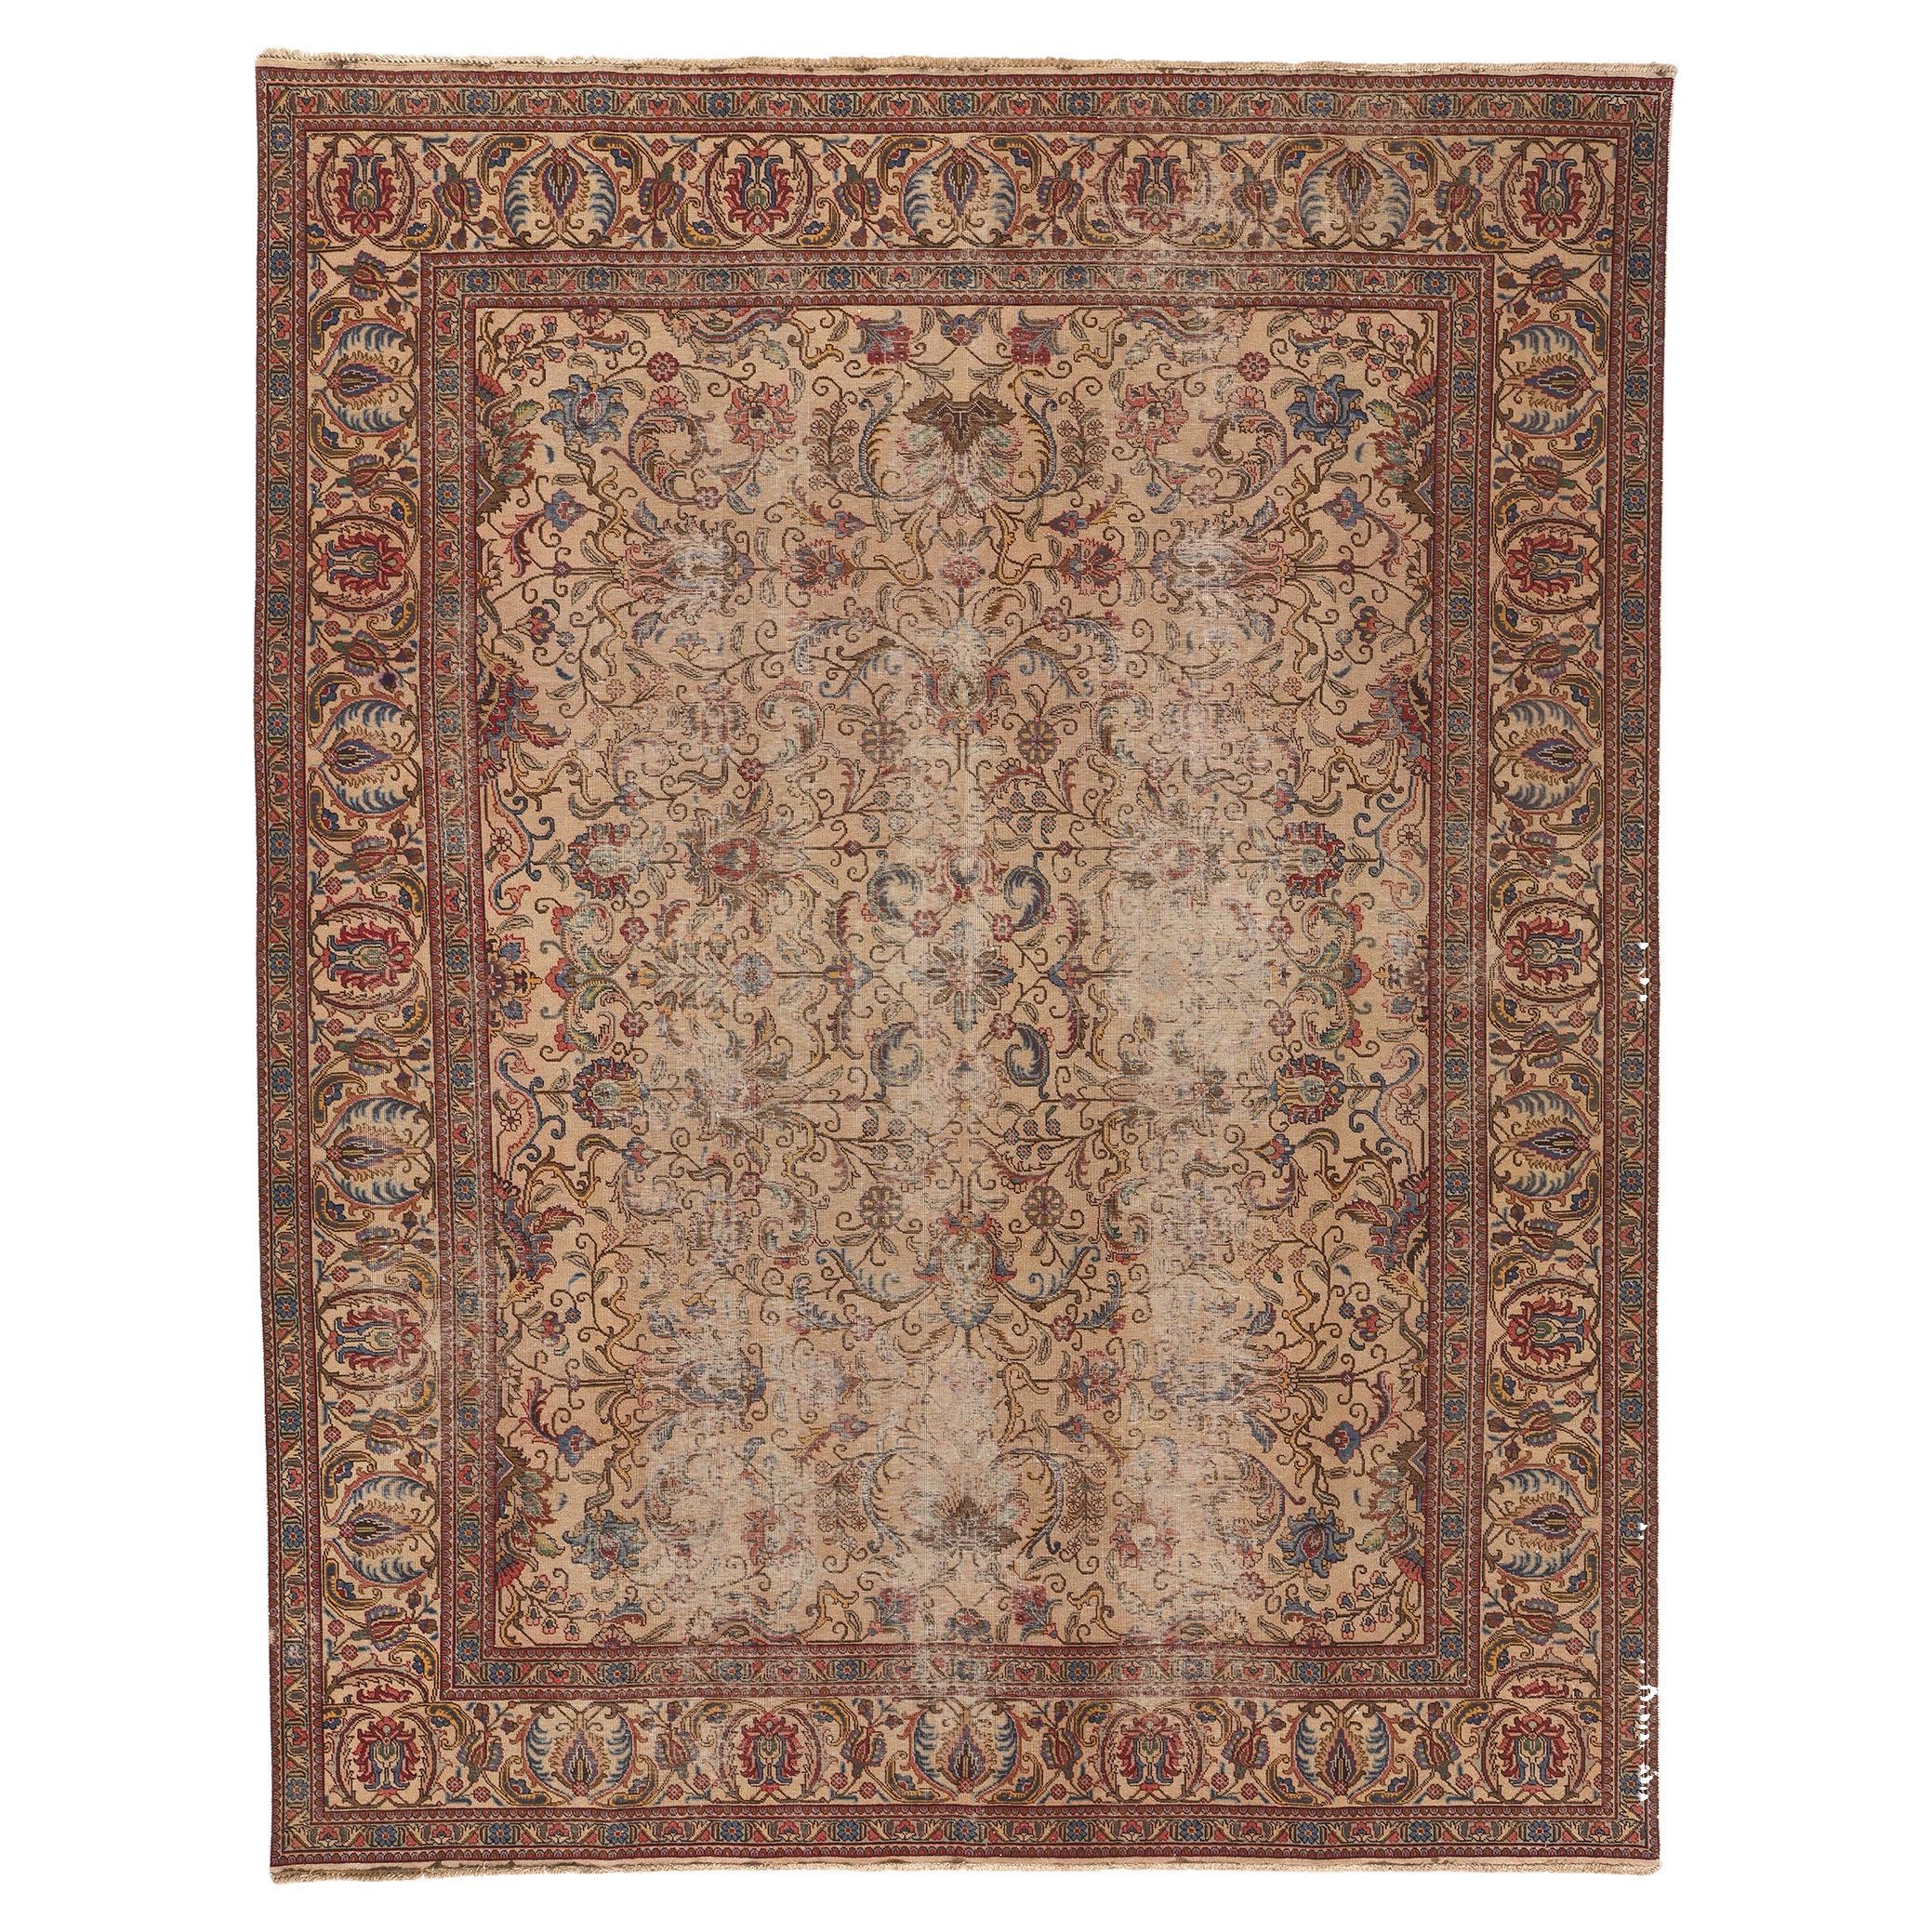 Antique-Worn Persian Tabriz Rug, Weathered Beauty Meets Rustic Sensibility